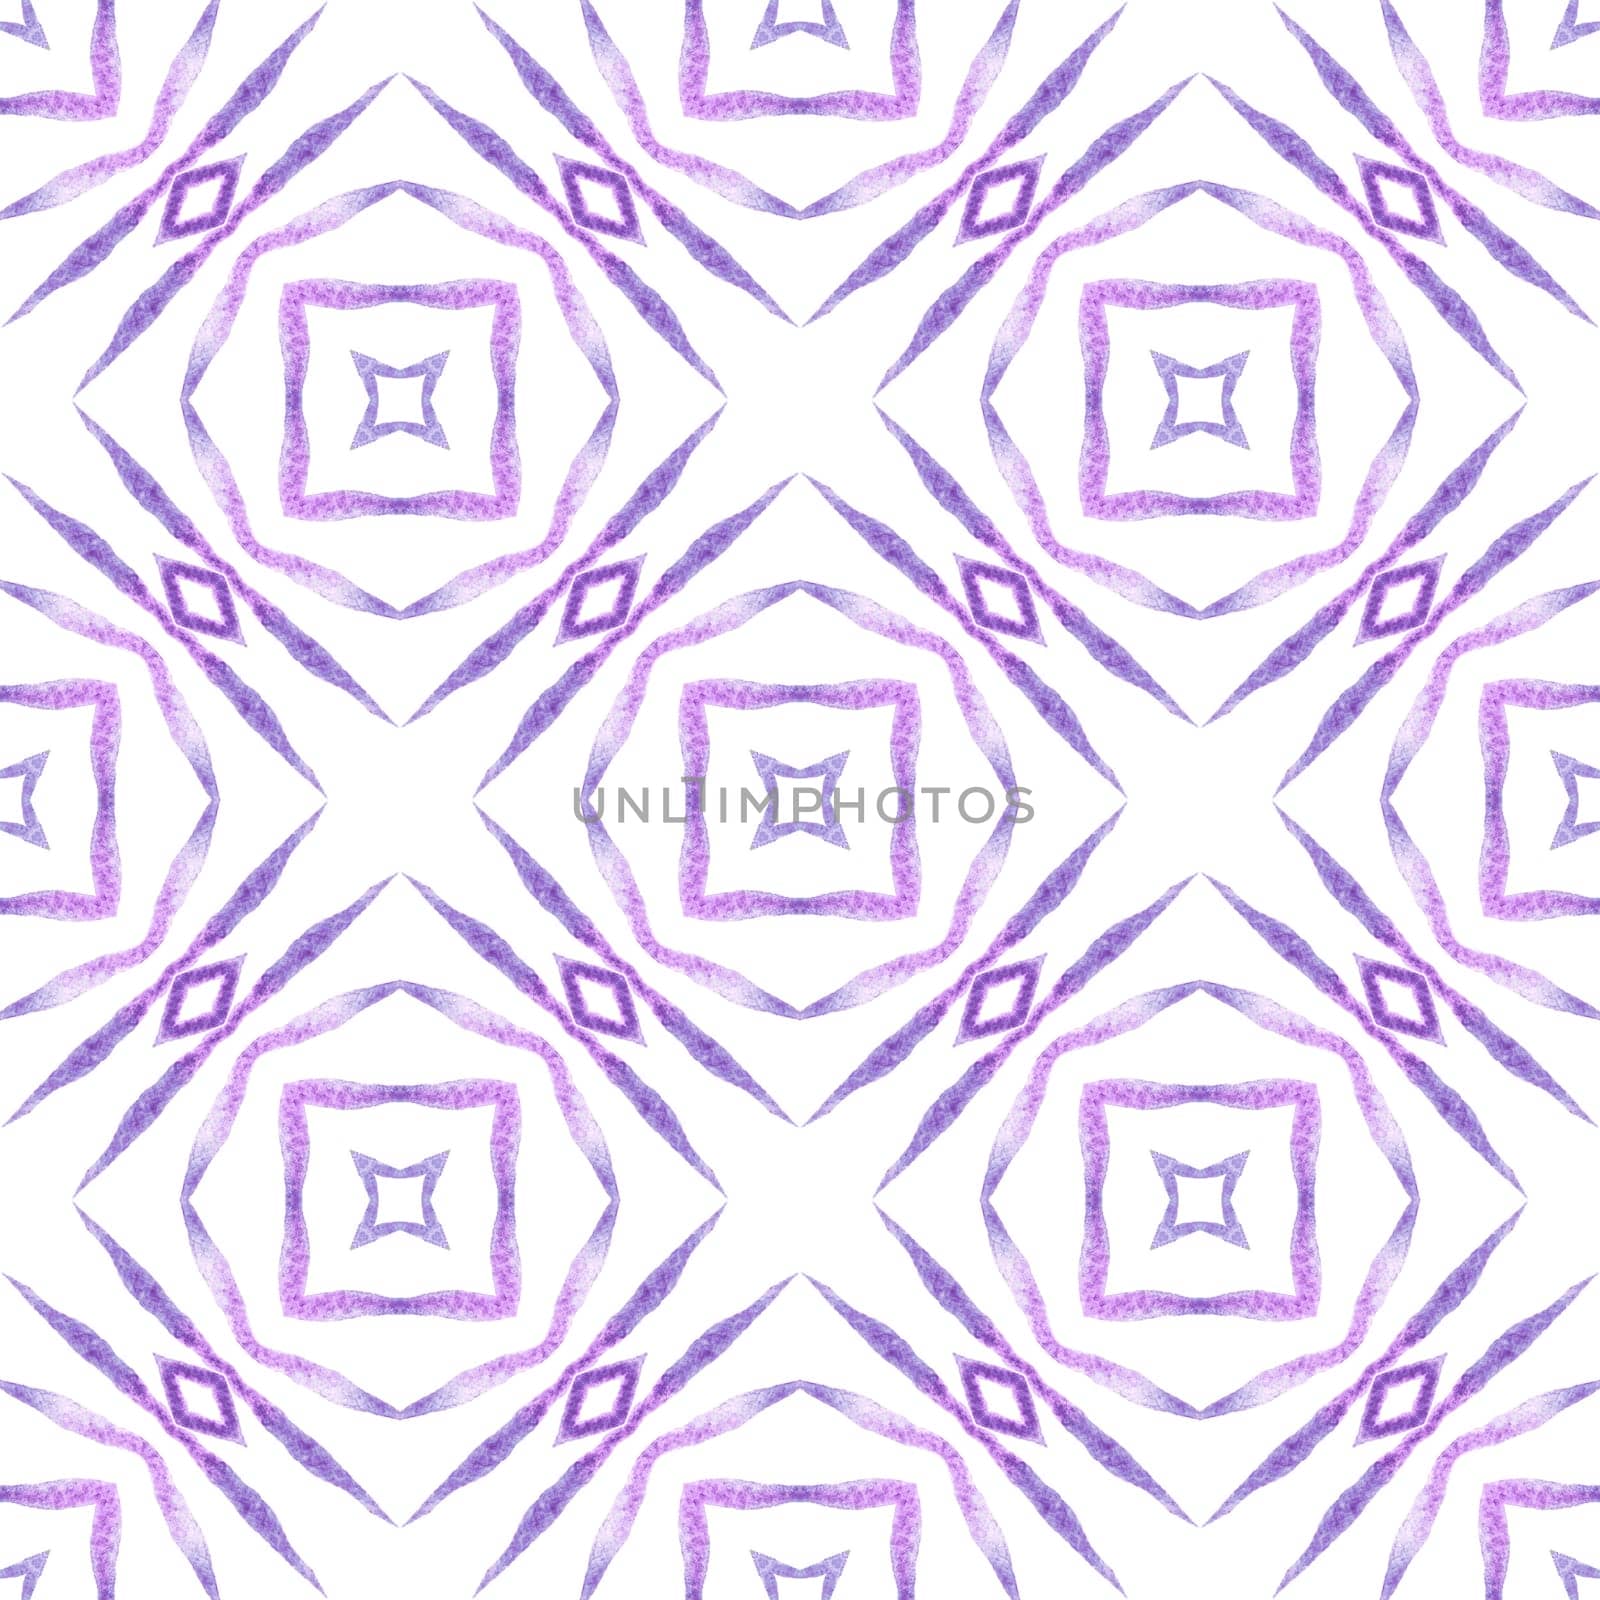 Textile ready classic print, swimwear fabric, wallpaper, wrapping. Purple overwhelming boho chic summer design. Tiled watercolor background. Hand painted tiled watercolor border.